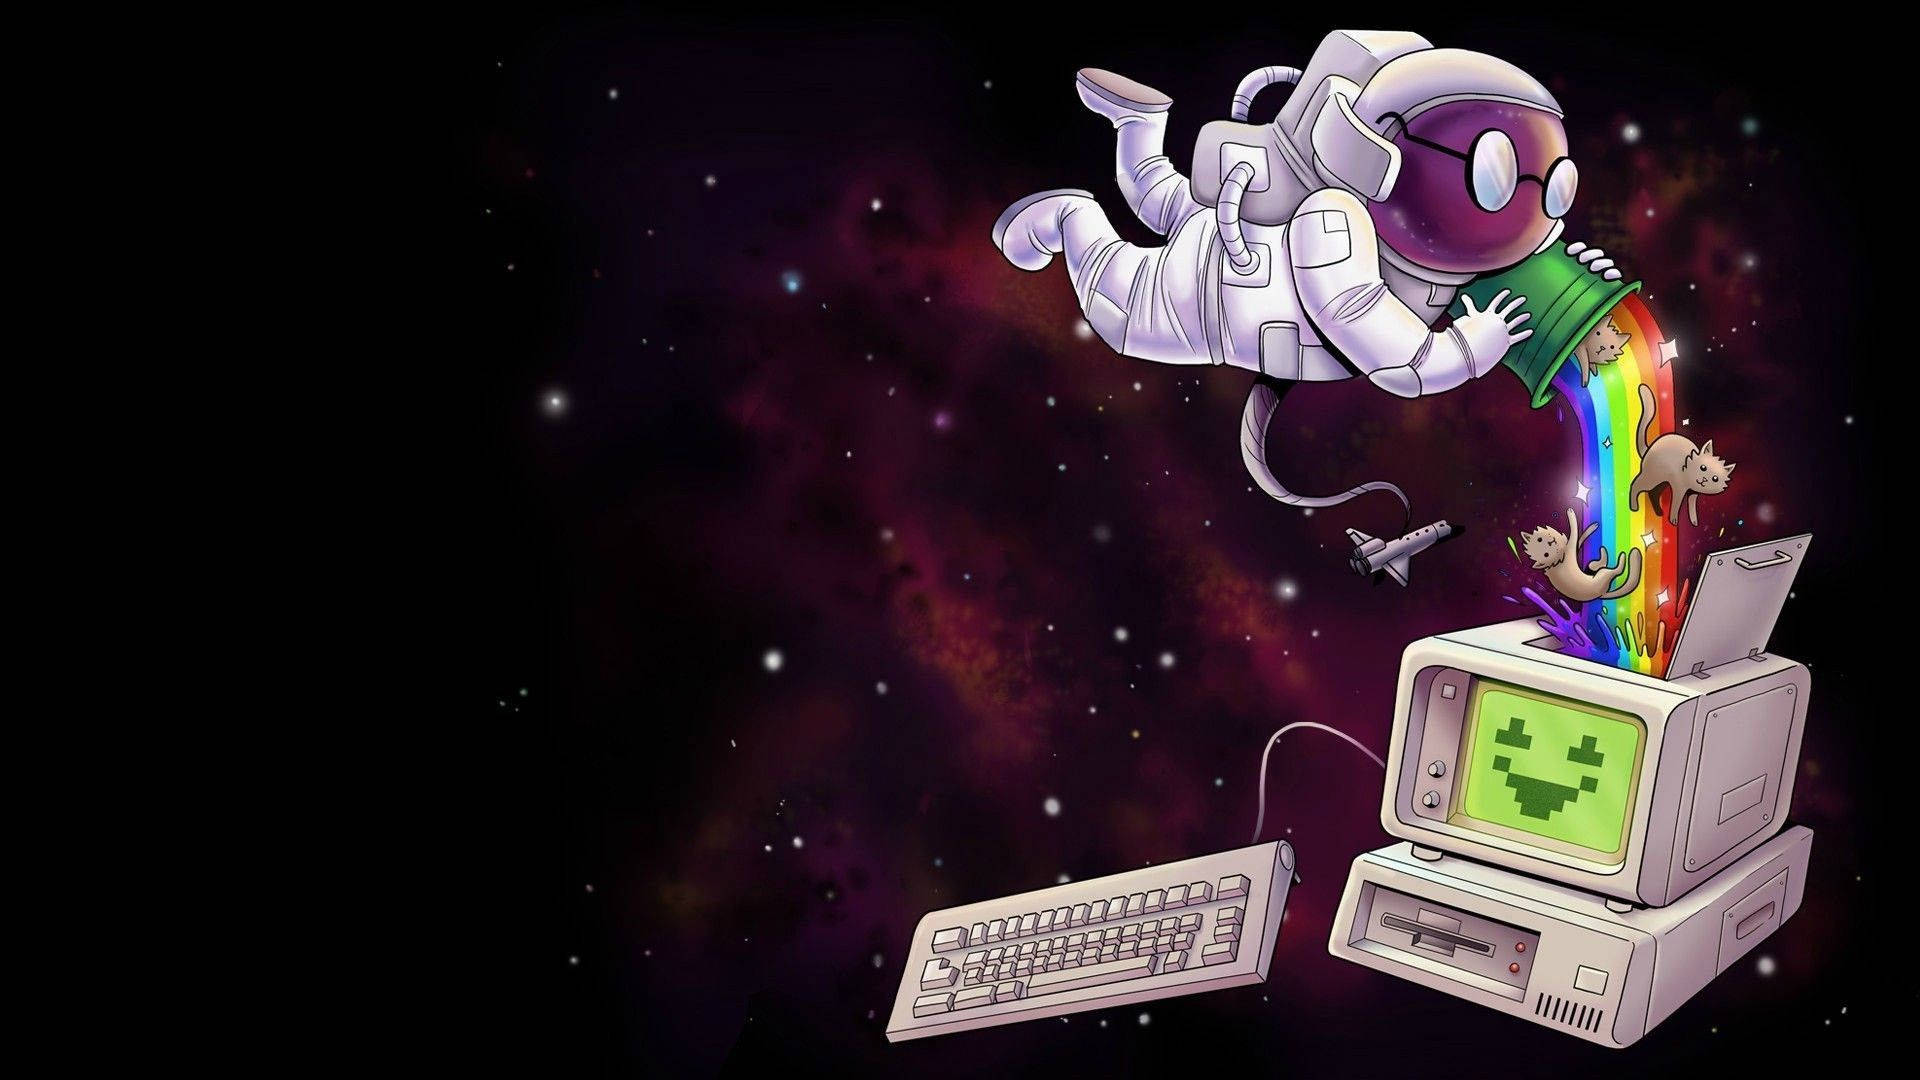 Astronaut Aesthetic With Computer